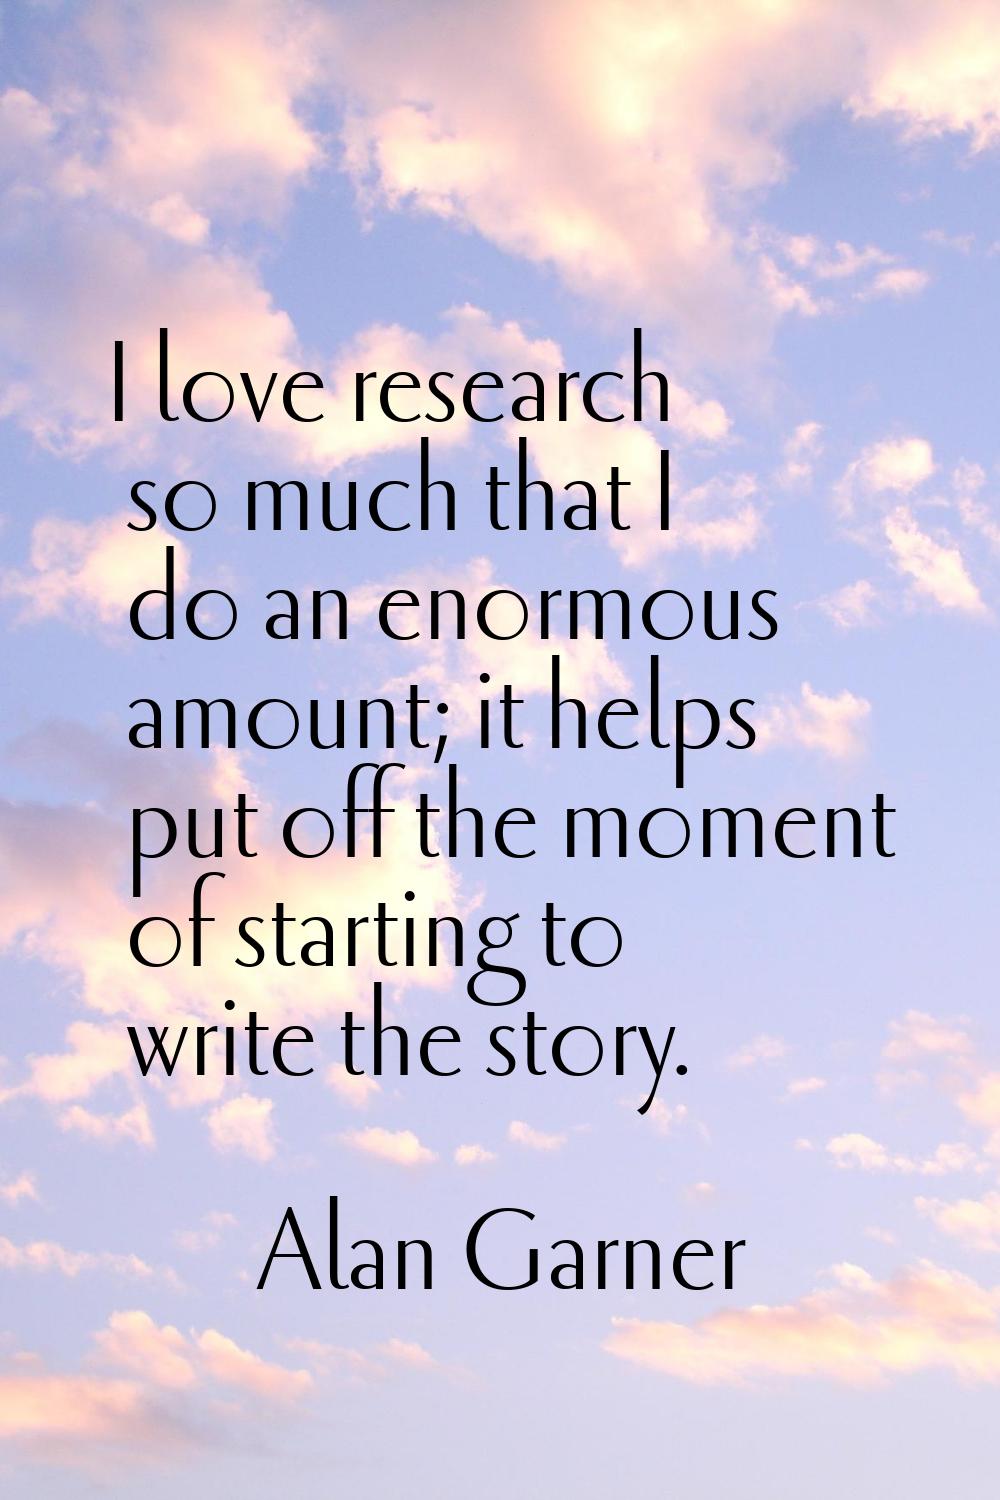 I love research so much that I do an enormous amount; it helps put off the moment of starting to wr